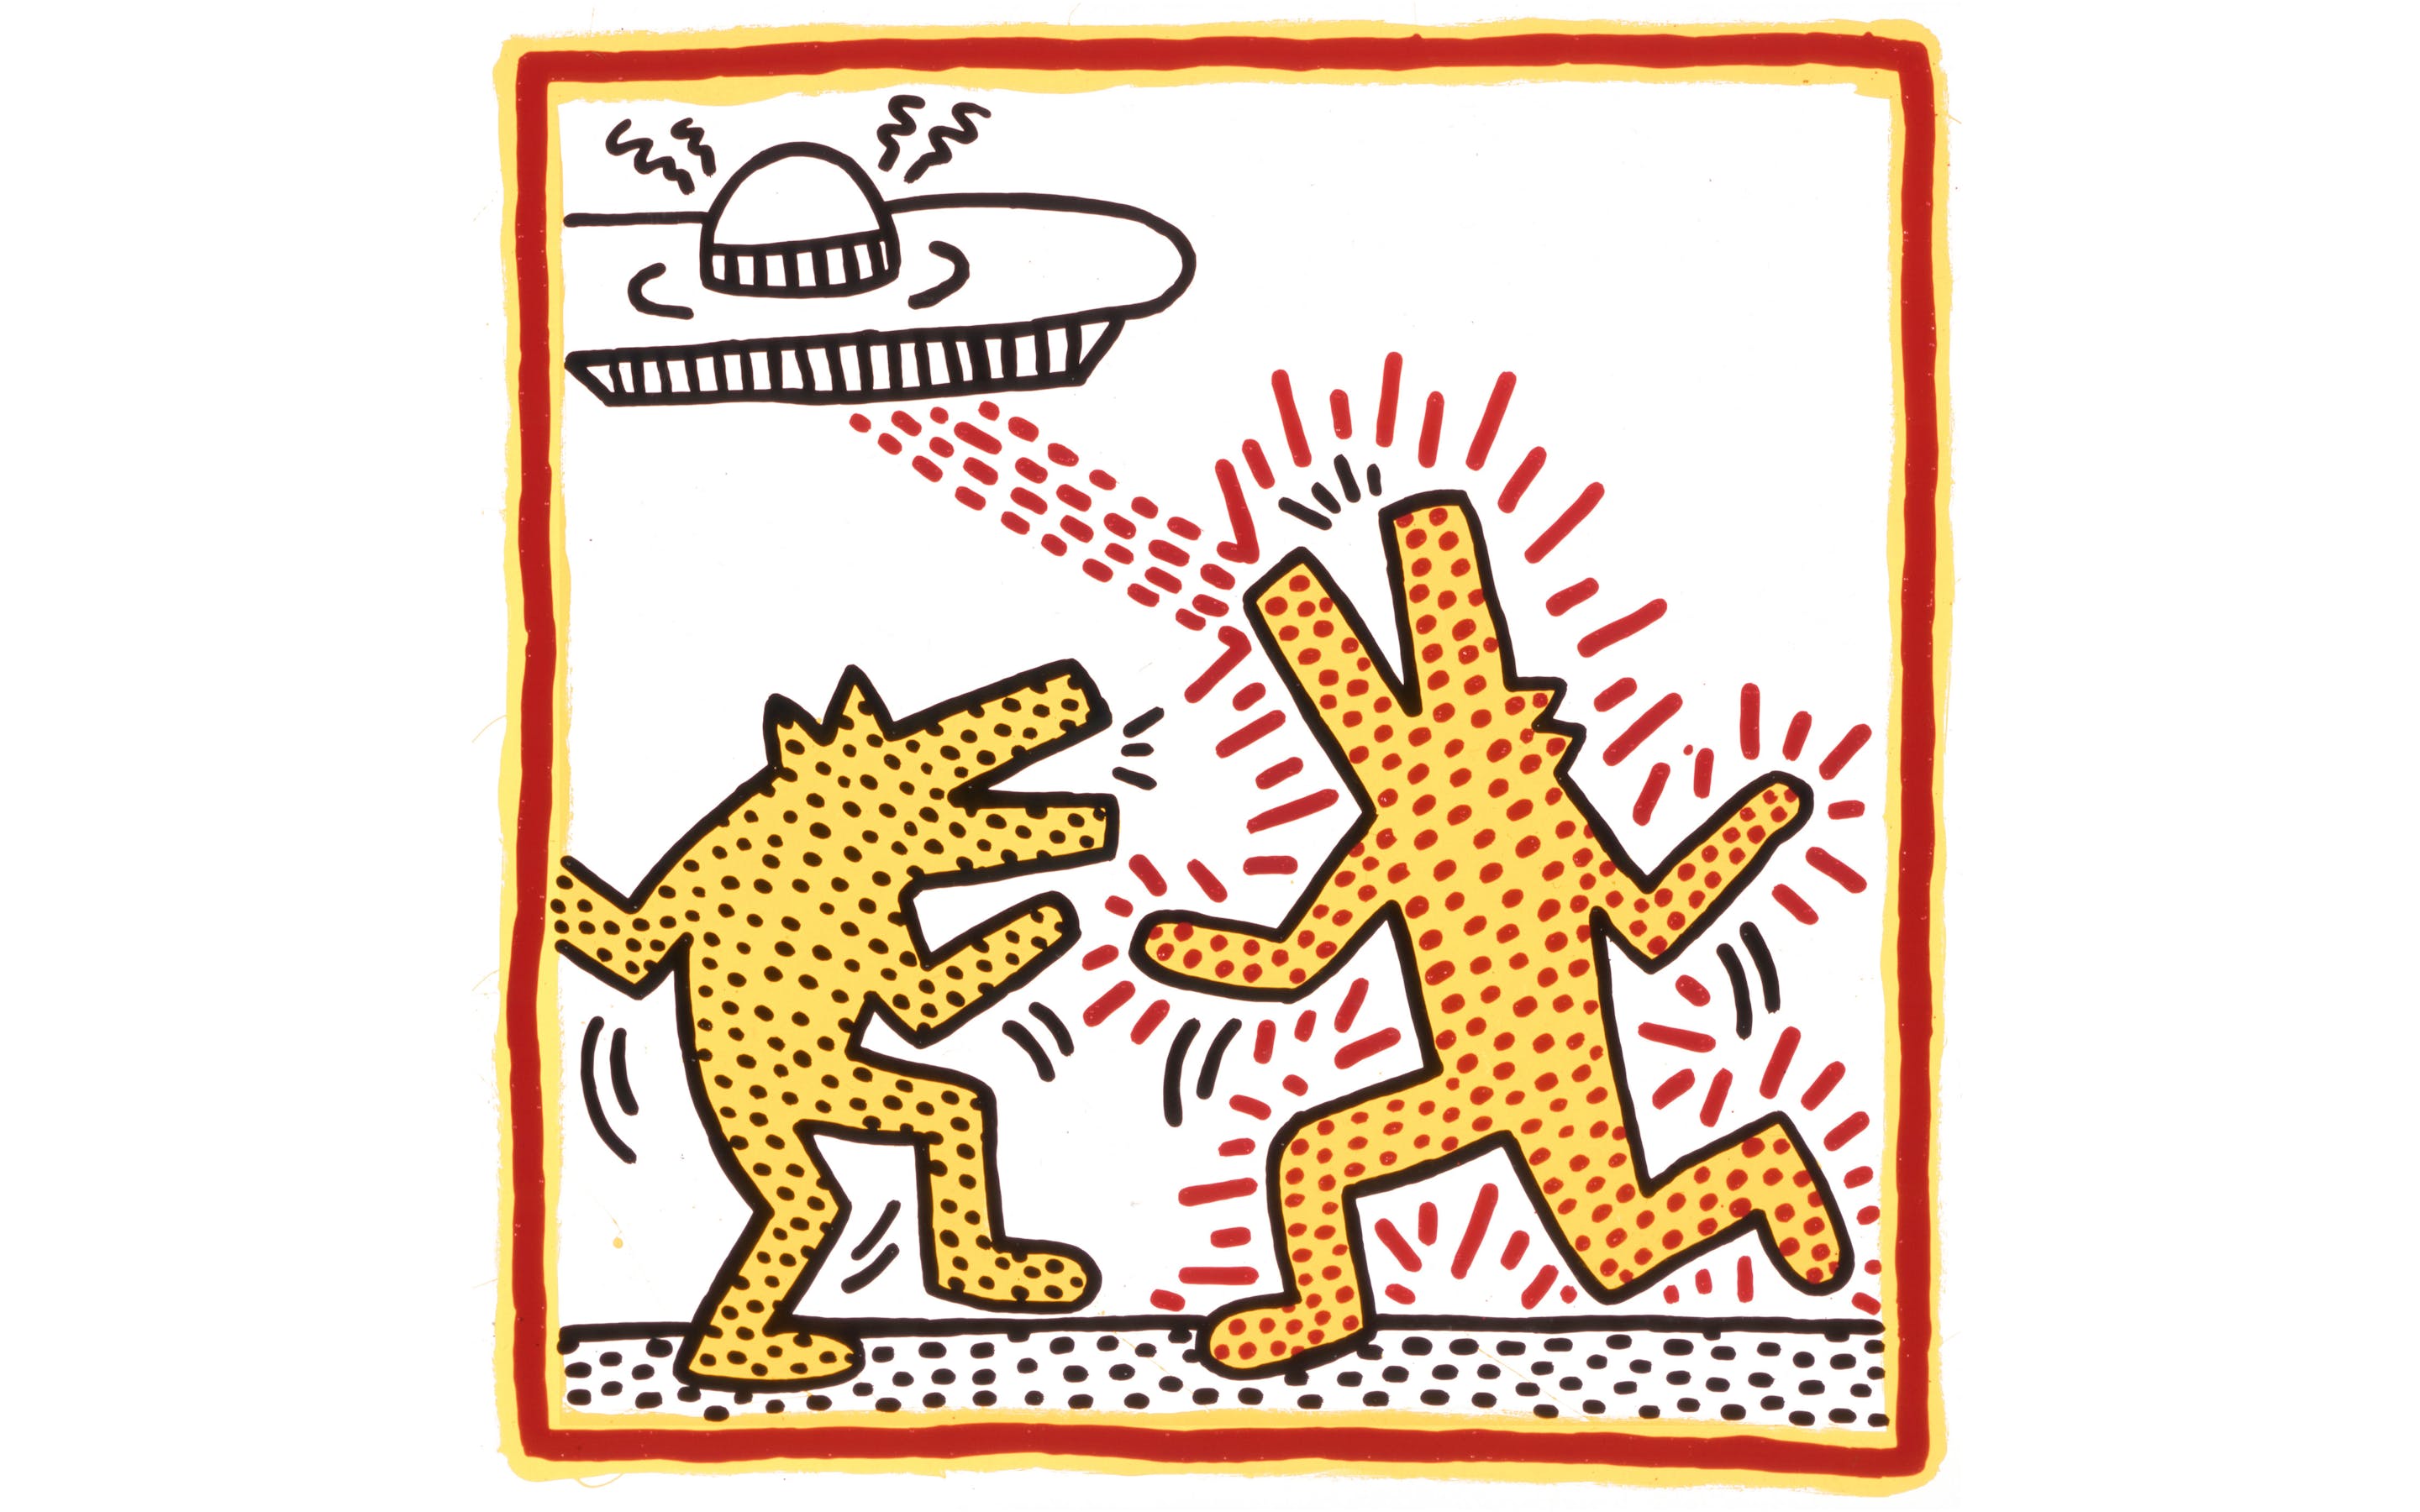 Cartoon-like drawing of two figures with wolf heads moving while one of them is zapped by beams coming out of a UFO in the sky.